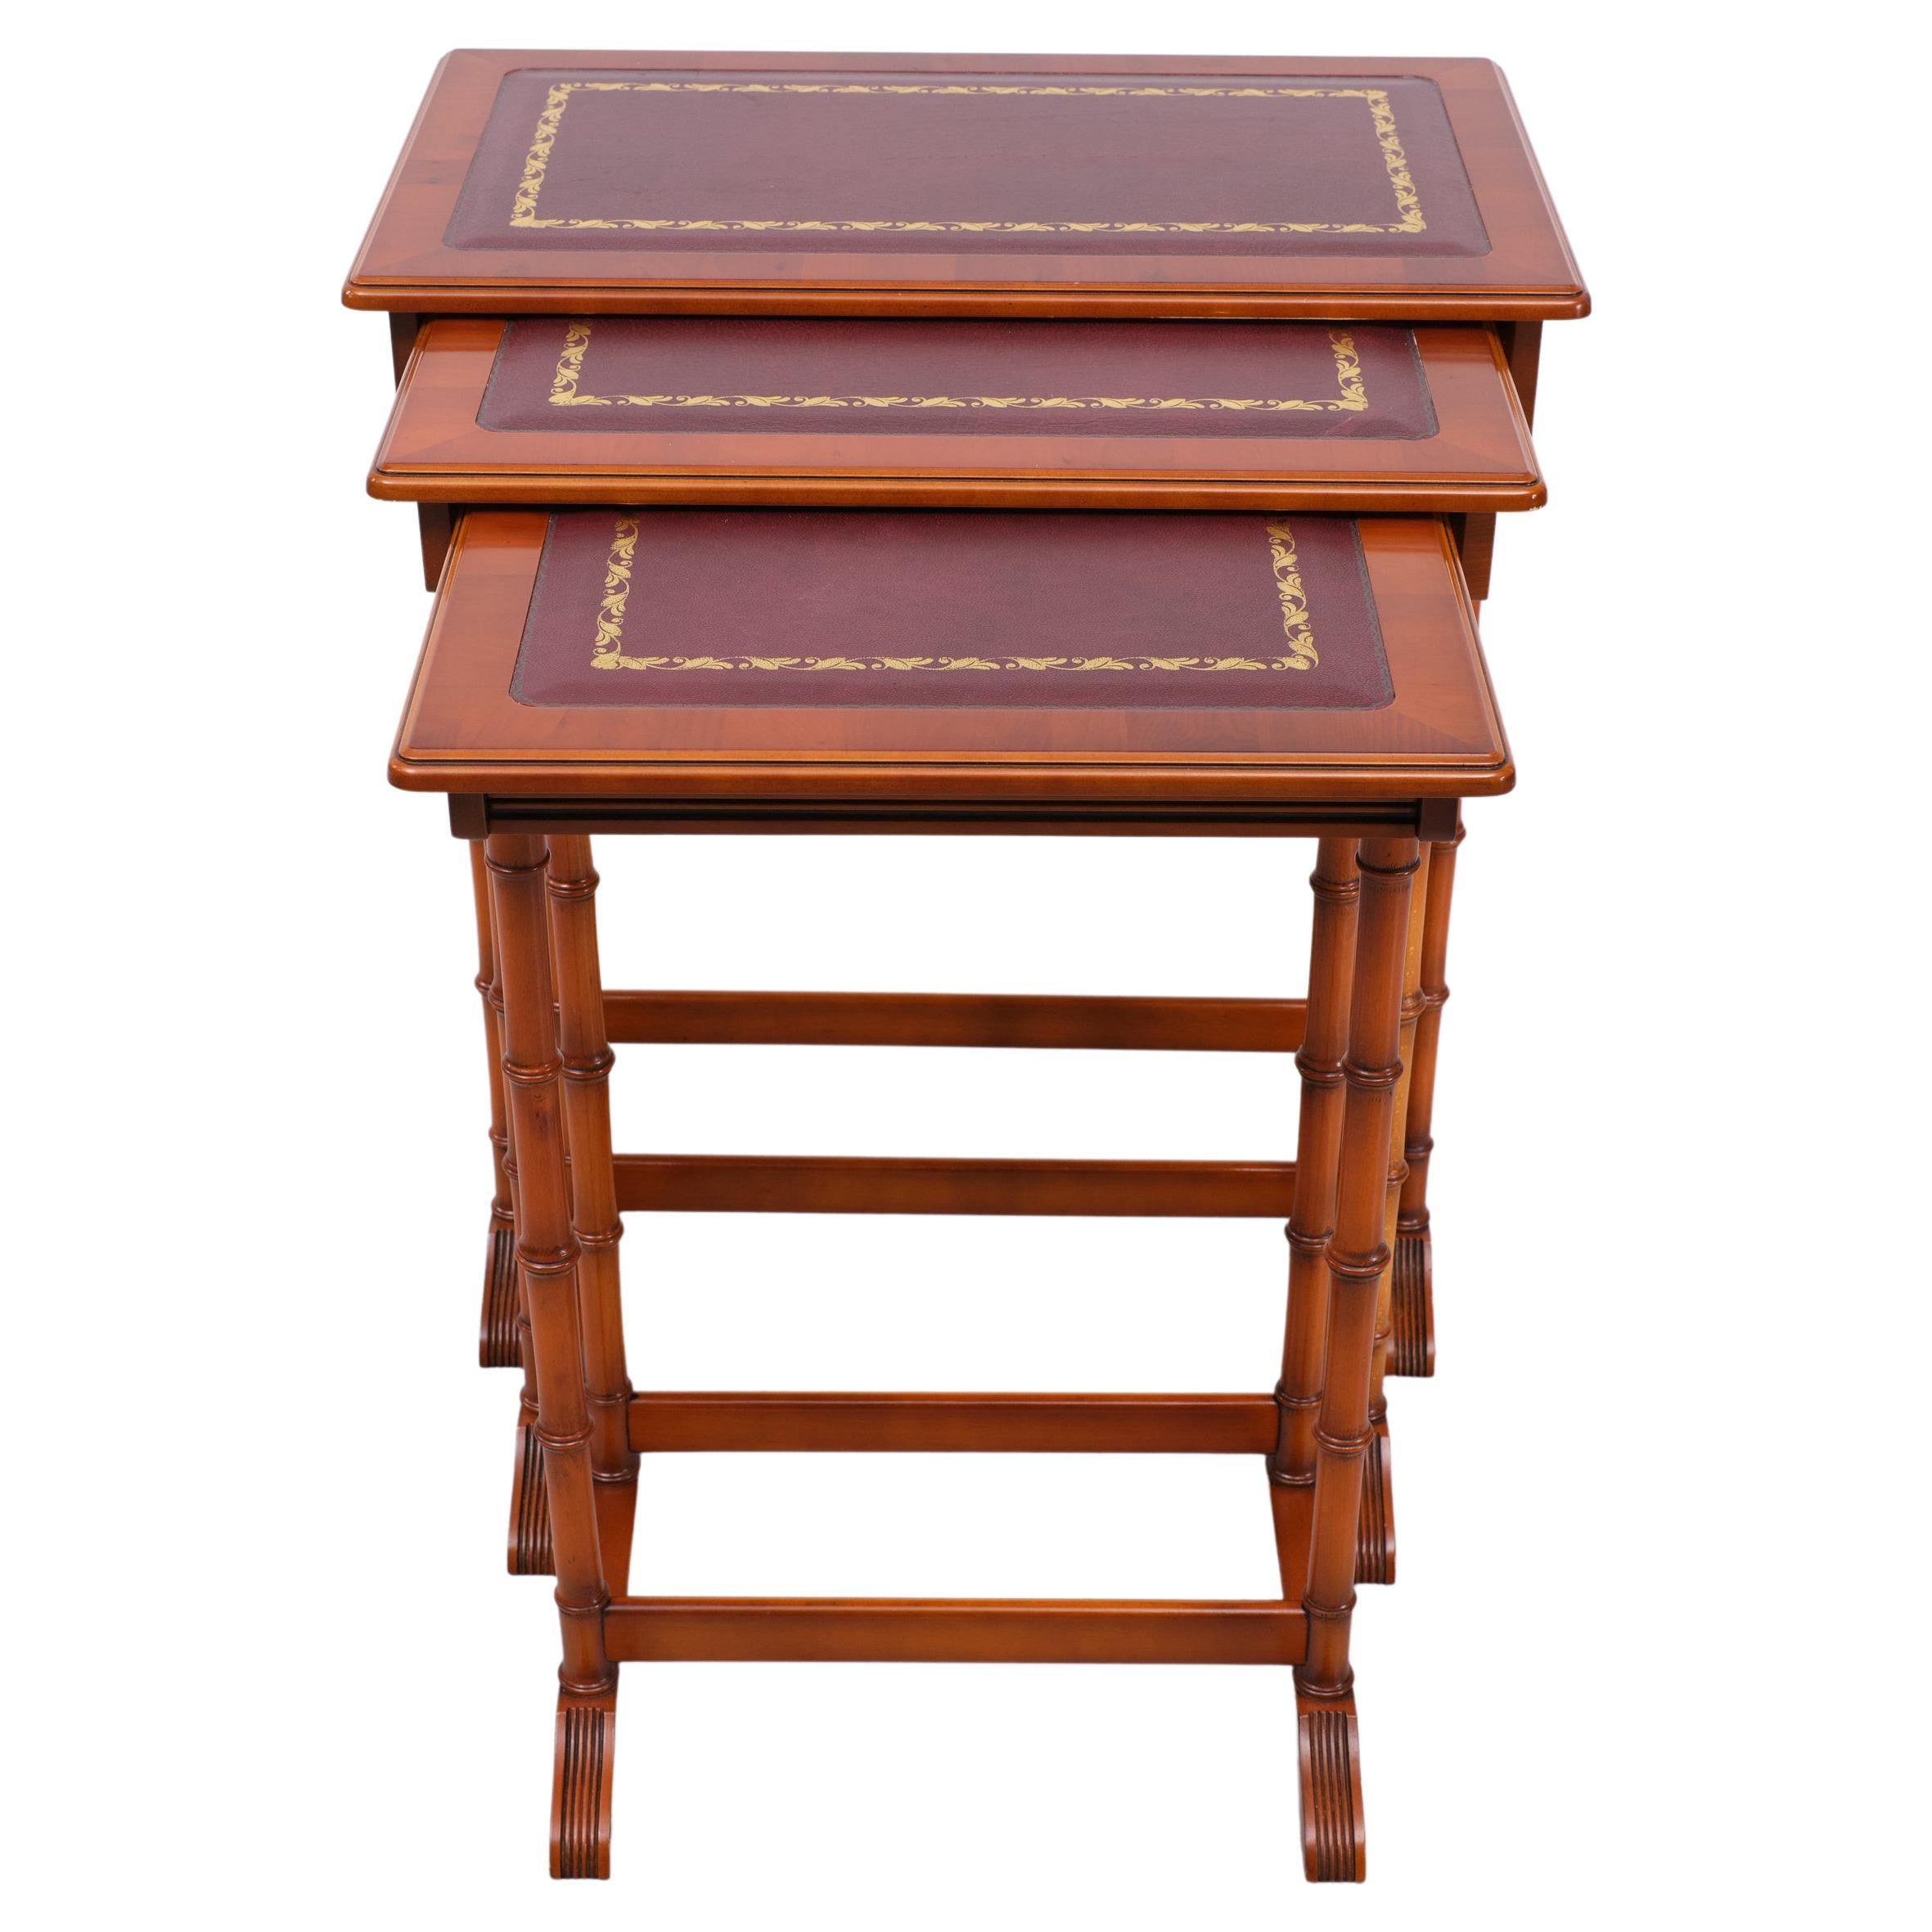   Exclusive English furniture  Cherry wood nesting tables  1970s  For Sale